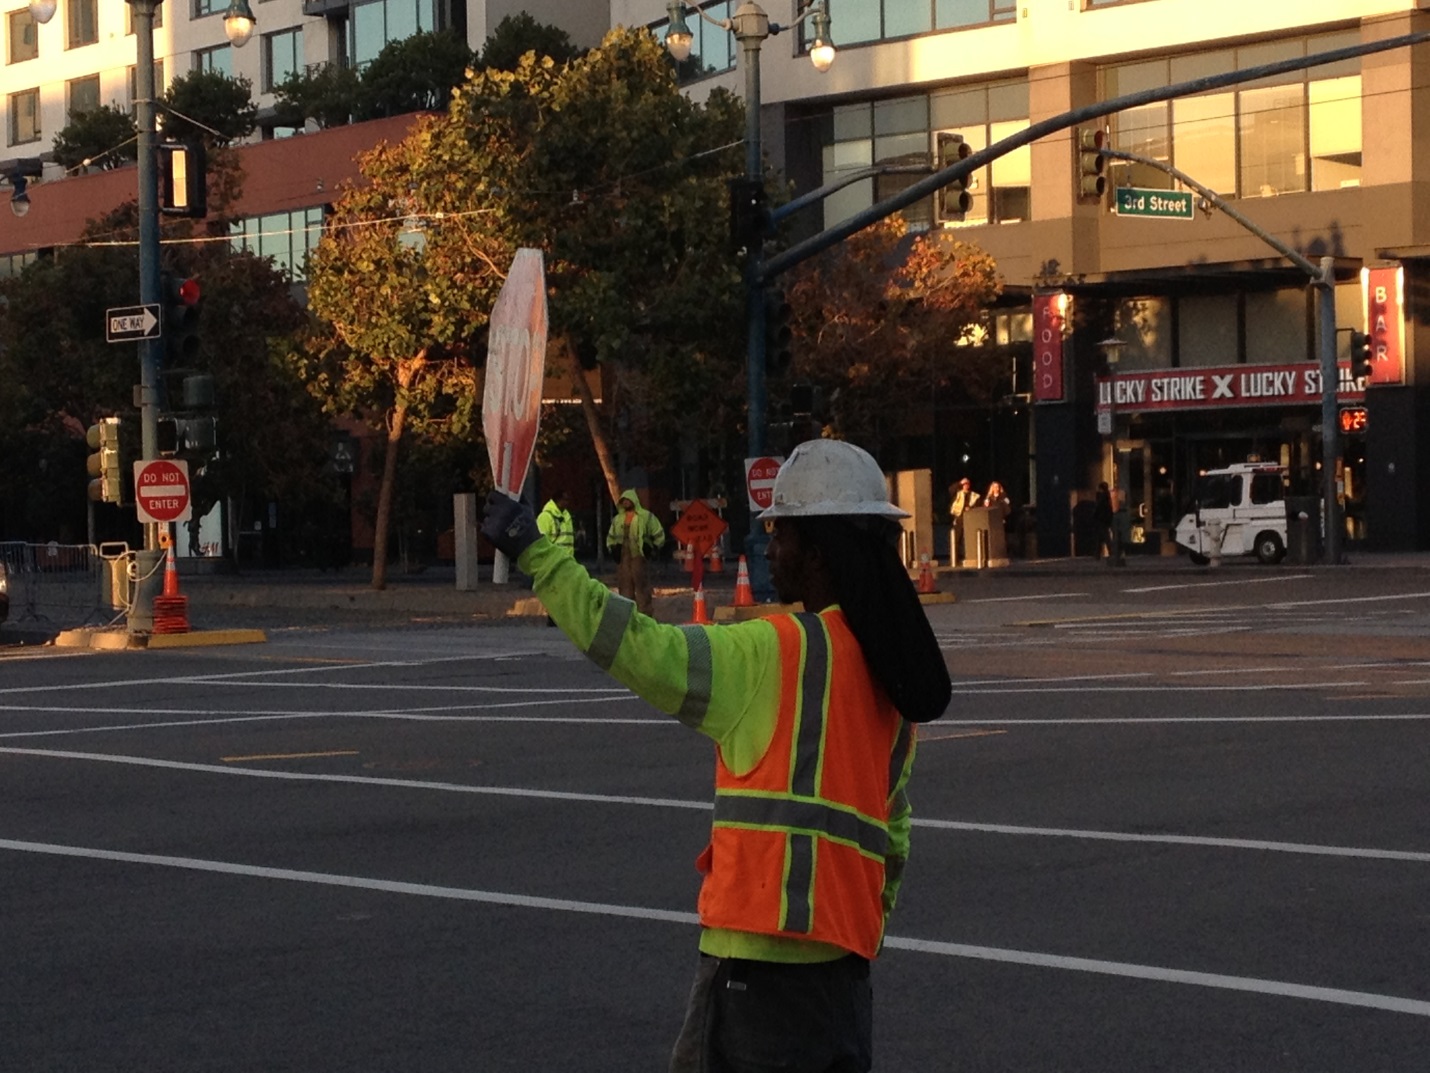 A woman in a safety vest and hard hat holds up a stop sign in the middle of the 4th and King intersection.